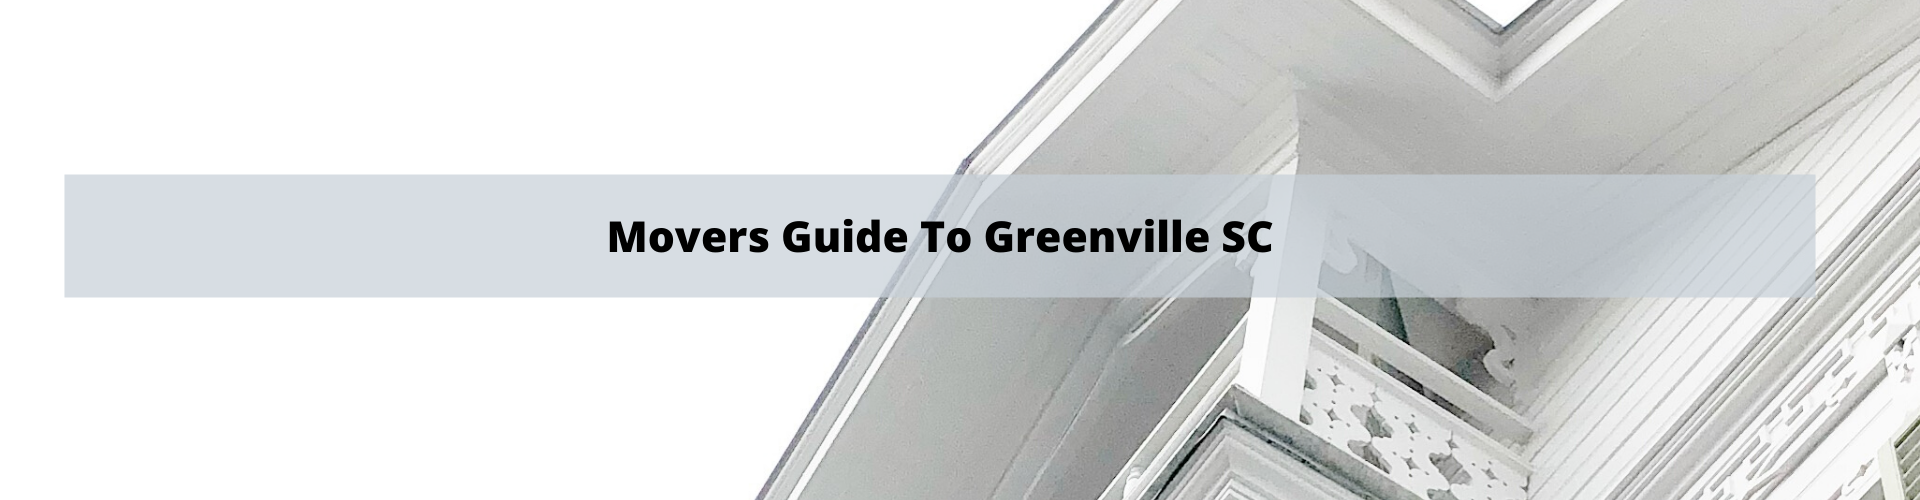 Movers Guide To Greenville SC